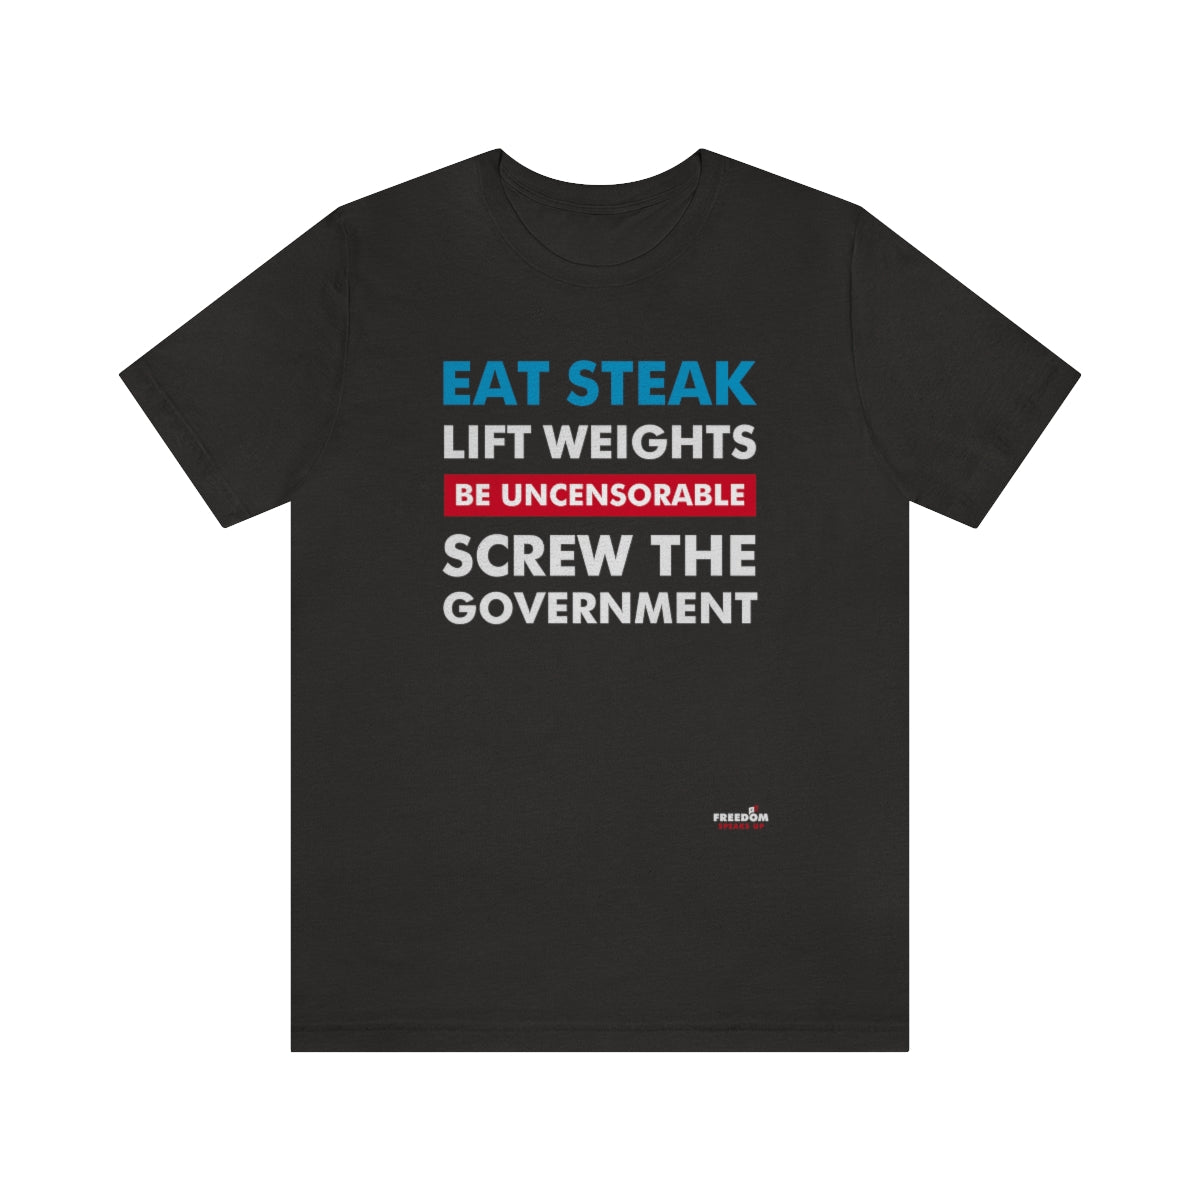 Eat Steak. Lift Weights. Be Uncensorable. Screw the Government. T-Shirt Black Heather XS 